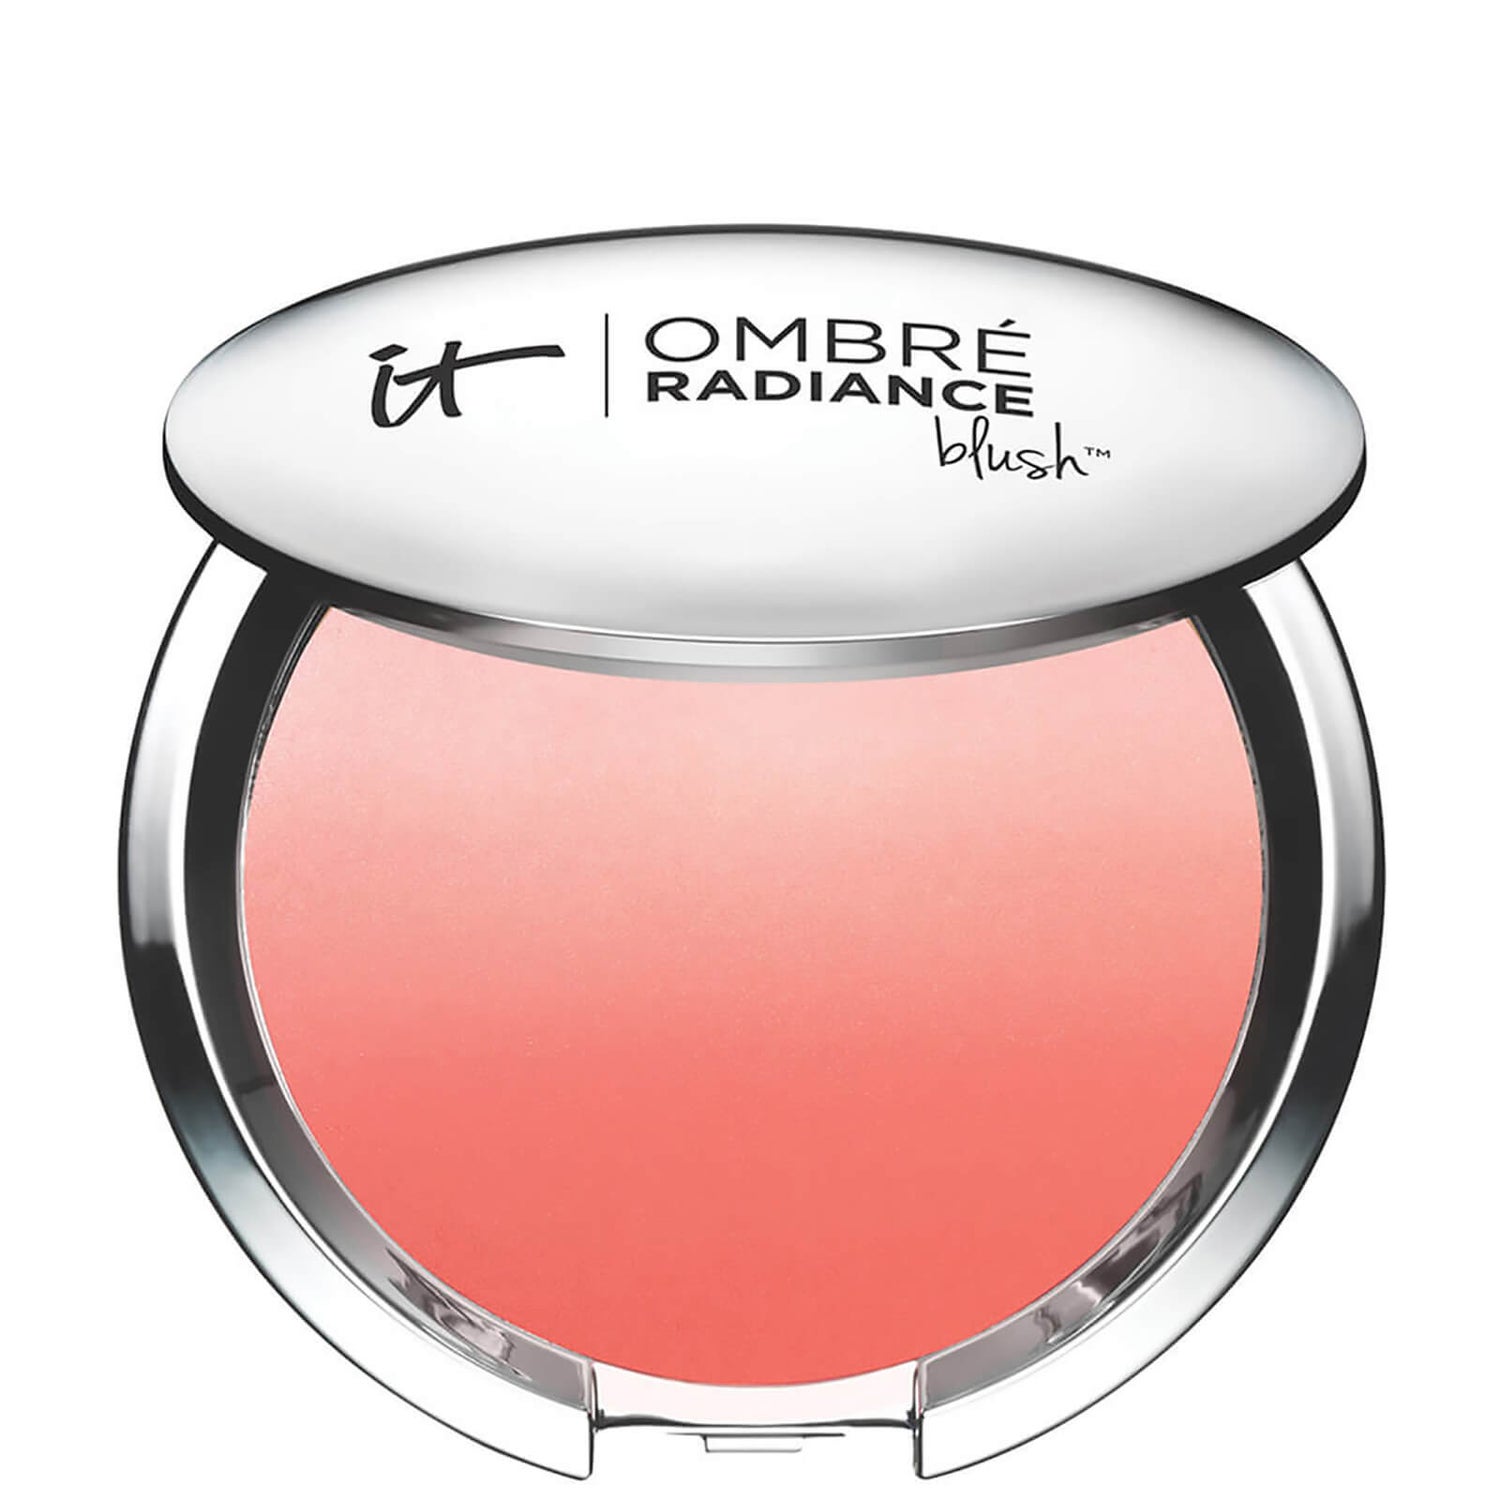 IT Cosmetics Ombré Radiance Blush 10.8g (Various Shades)